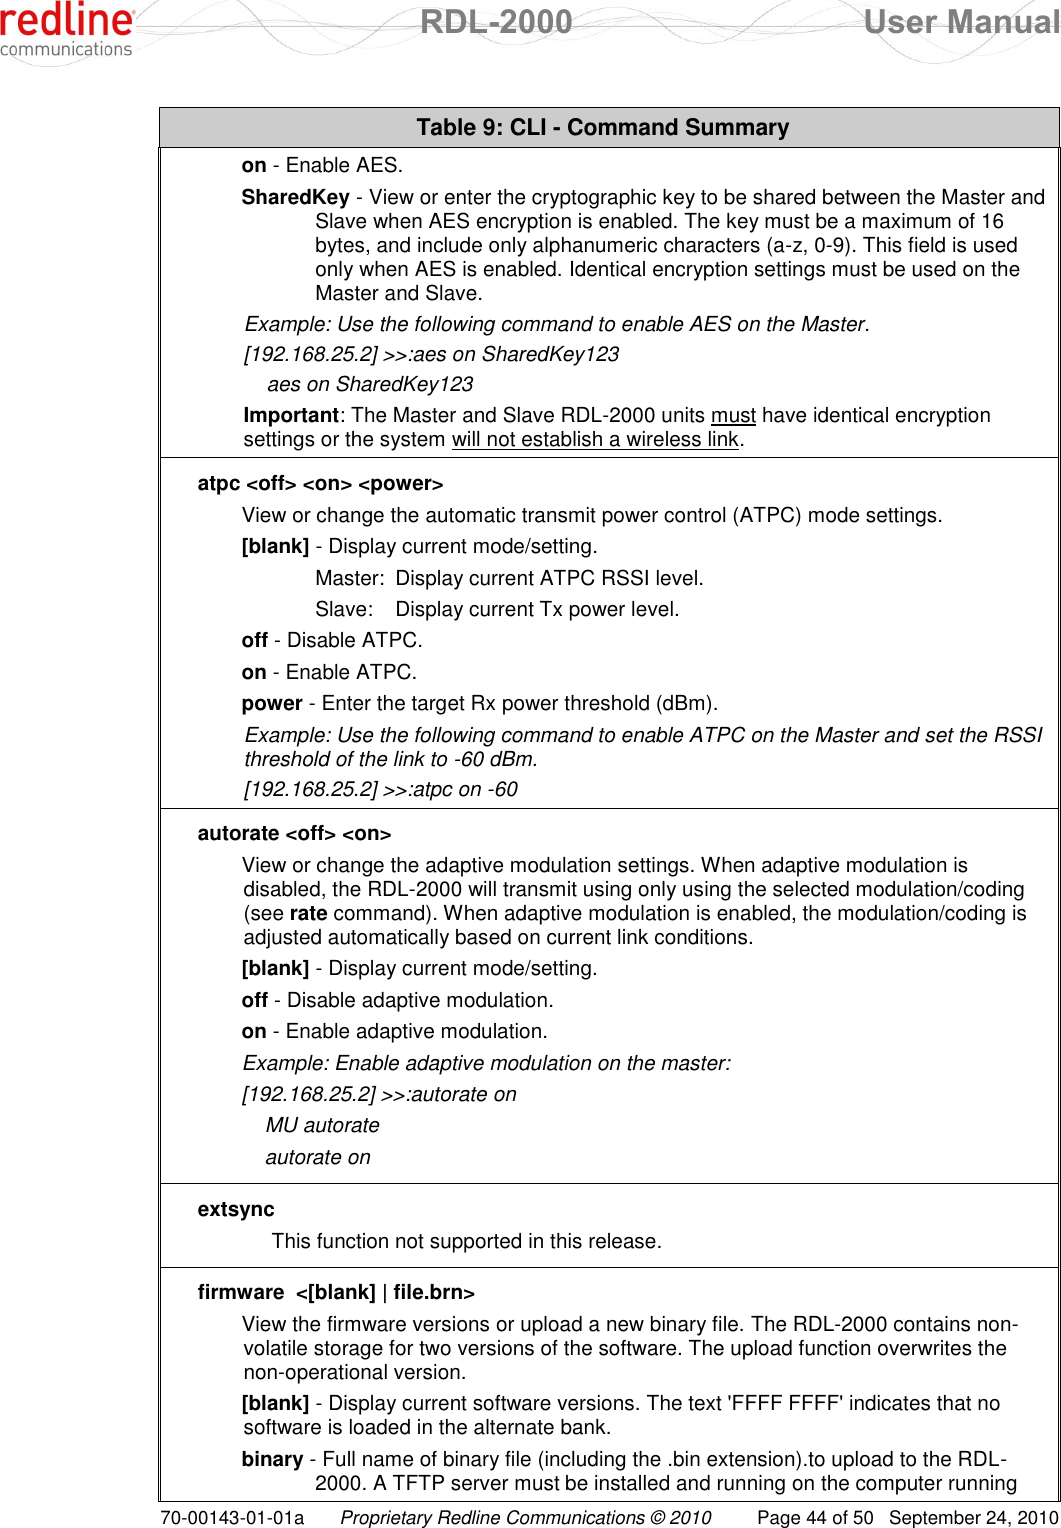  RDL-2000  User Manual 70-00143-01-01a Proprietary Redline Communications © 2010  Page 44 of 50  September 24, 2010 Table 9: CLI - Command Summary on - Enable AES. SharedKey - View or enter the cryptographic key to be shared between the Master and Slave when AES encryption is enabled. The key must be a maximum of 16 bytes, and include only alphanumeric characters (a-z, 0-9). This field is used only when AES is enabled. Identical encryption settings must be used on the Master and Slave. Example: Use the following command to enable AES on the Master. [192.168.25.2] &gt;&gt;:aes on SharedKey123     aes on SharedKey123 Important: The Master and Slave RDL-2000 units must have identical encryption settings or the system will not establish a wireless link. atpc &lt;off&gt; &lt;on&gt; &lt;power&gt; View or change the automatic transmit power control (ATPC) mode settings. [blank] - Display current mode/setting.   Master:  Display current ATPC RSSI level.   Slave:  Display current Tx power level. off - Disable ATPC. on - Enable ATPC. power - Enter the target Rx power threshold (dBm). Example: Use the following command to enable ATPC on the Master and set the RSSI threshold of the link to -60 dBm. [192.168.25.2] &gt;&gt;:atpc on -60 autorate &lt;off&gt; &lt;on&gt; View or change the adaptive modulation settings. When adaptive modulation is disabled, the RDL-2000 will transmit using only using the selected modulation/coding (see rate command). When adaptive modulation is enabled, the modulation/coding is adjusted automatically based on current link conditions. [blank] - Display current mode/setting. off - Disable adaptive modulation. on - Enable adaptive modulation. Example: Enable adaptive modulation on the master: [192.168.25.2] &gt;&gt;:autorate on     MU autorate     autorate on extsync  This function not supported in this release. firmware  &lt;[blank] | file.brn&gt; View the firmware versions or upload a new binary file. The RDL-2000 contains non-volatile storage for two versions of the software. The upload function overwrites the non-operational version. [blank] - Display current software versions. The text &apos;FFFF FFFF&apos; indicates that no software is loaded in the alternate bank. binary - Full name of binary file (including the .bin extension).to upload to the RDL-2000. A TFTP server must be installed and running on the computer running 